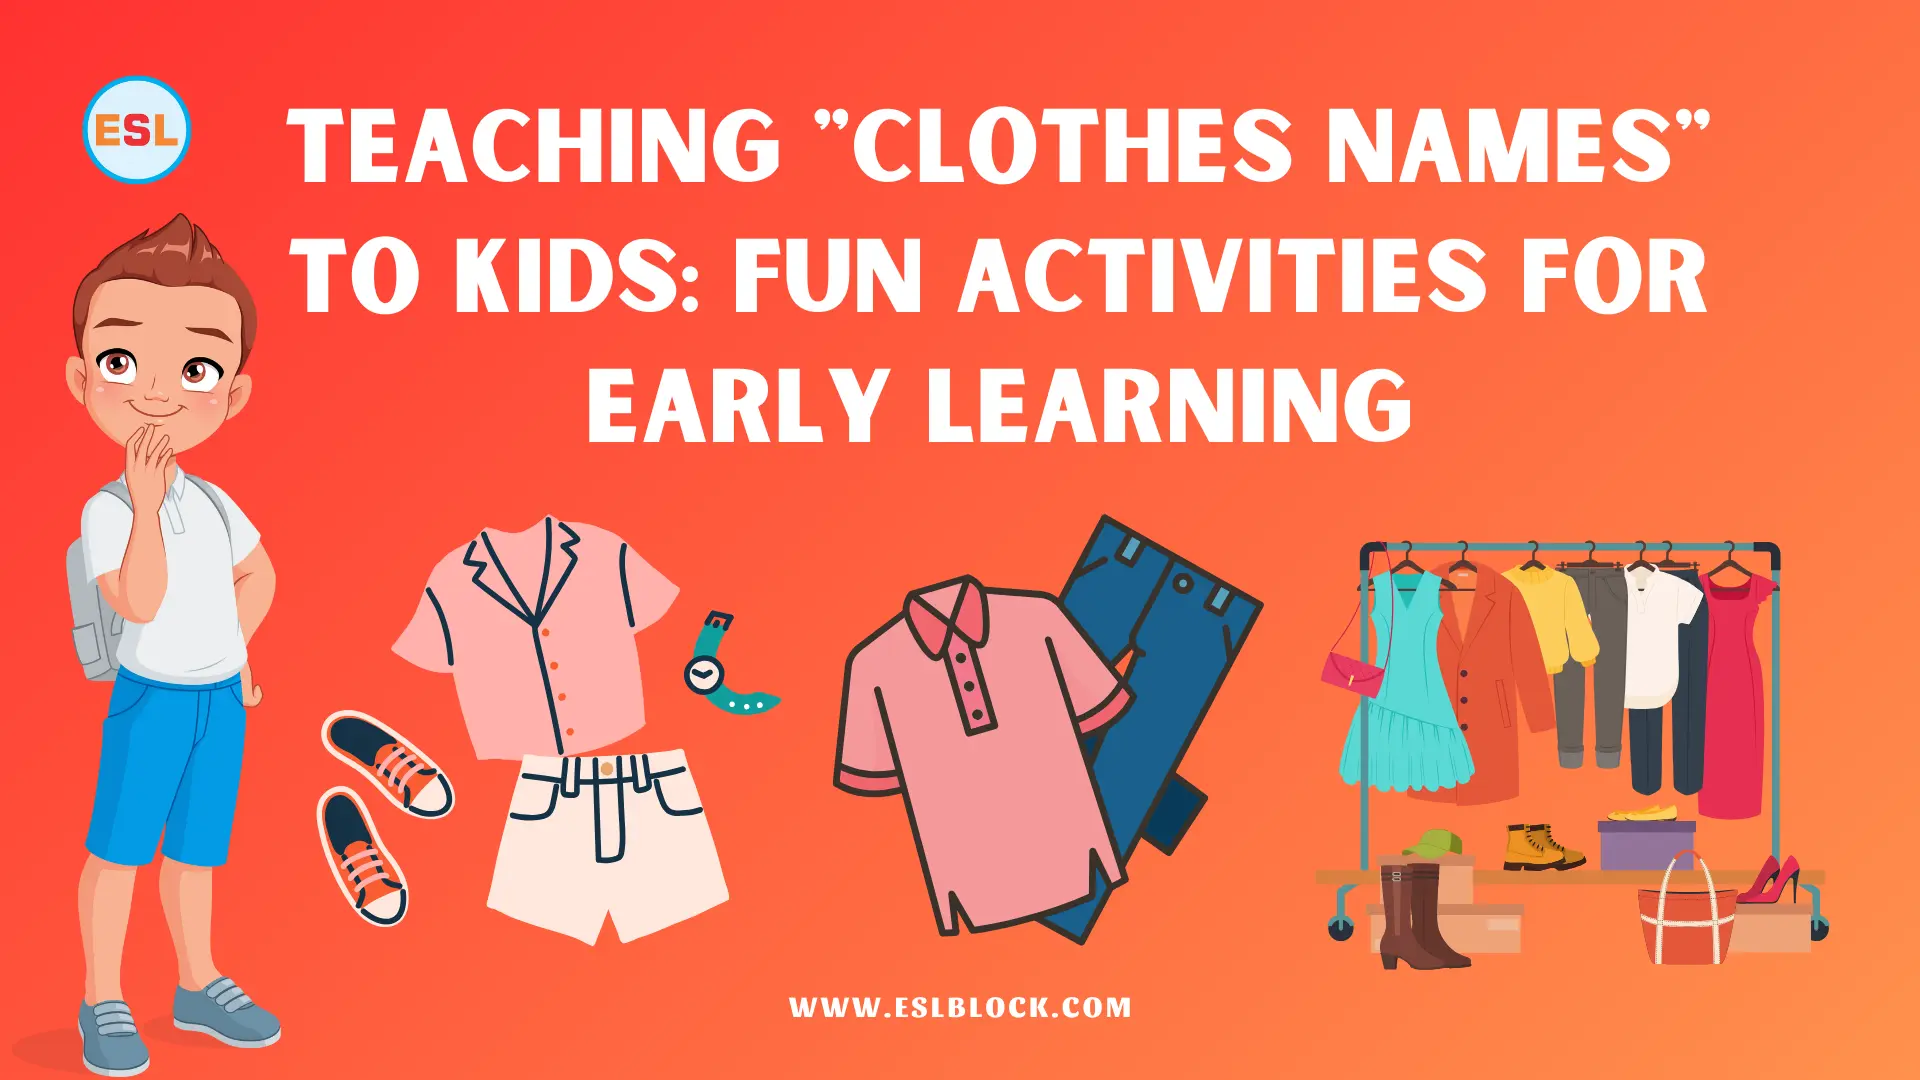 Teaching Clothes Names to Kids Fun Activities for Early Learning